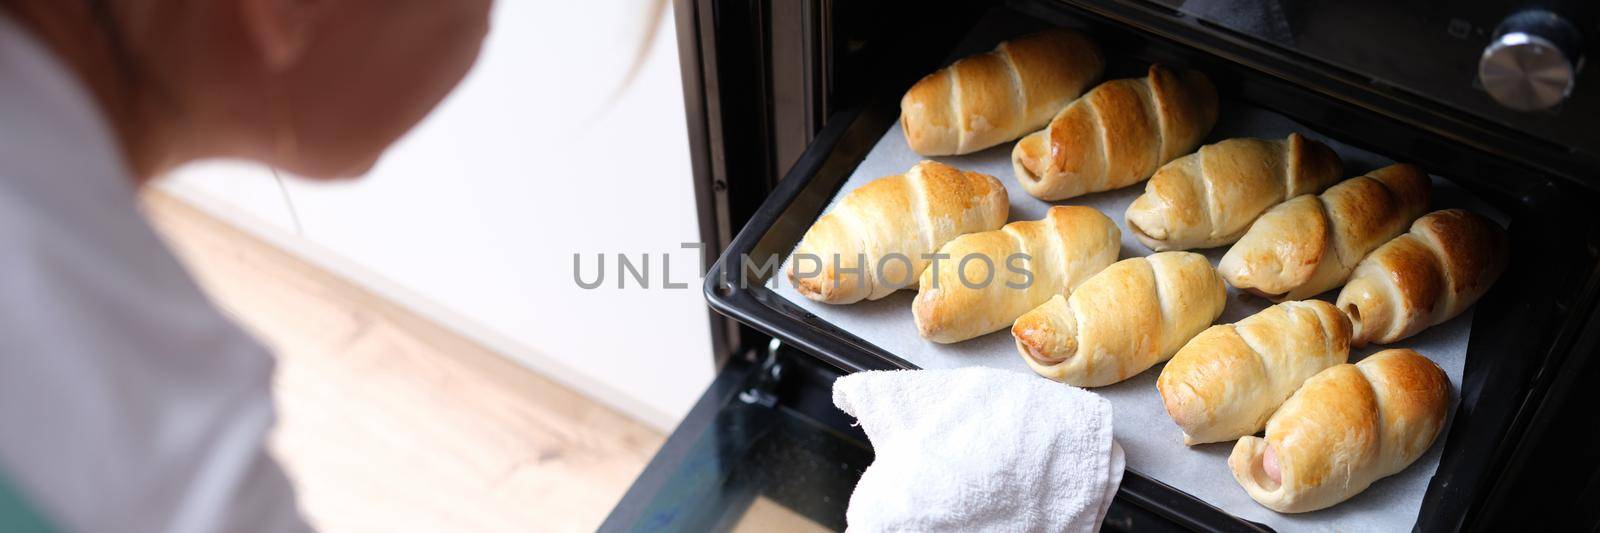 Woman takes out baking sheet of cooked croissants from oven. Cooking flour products at home concept